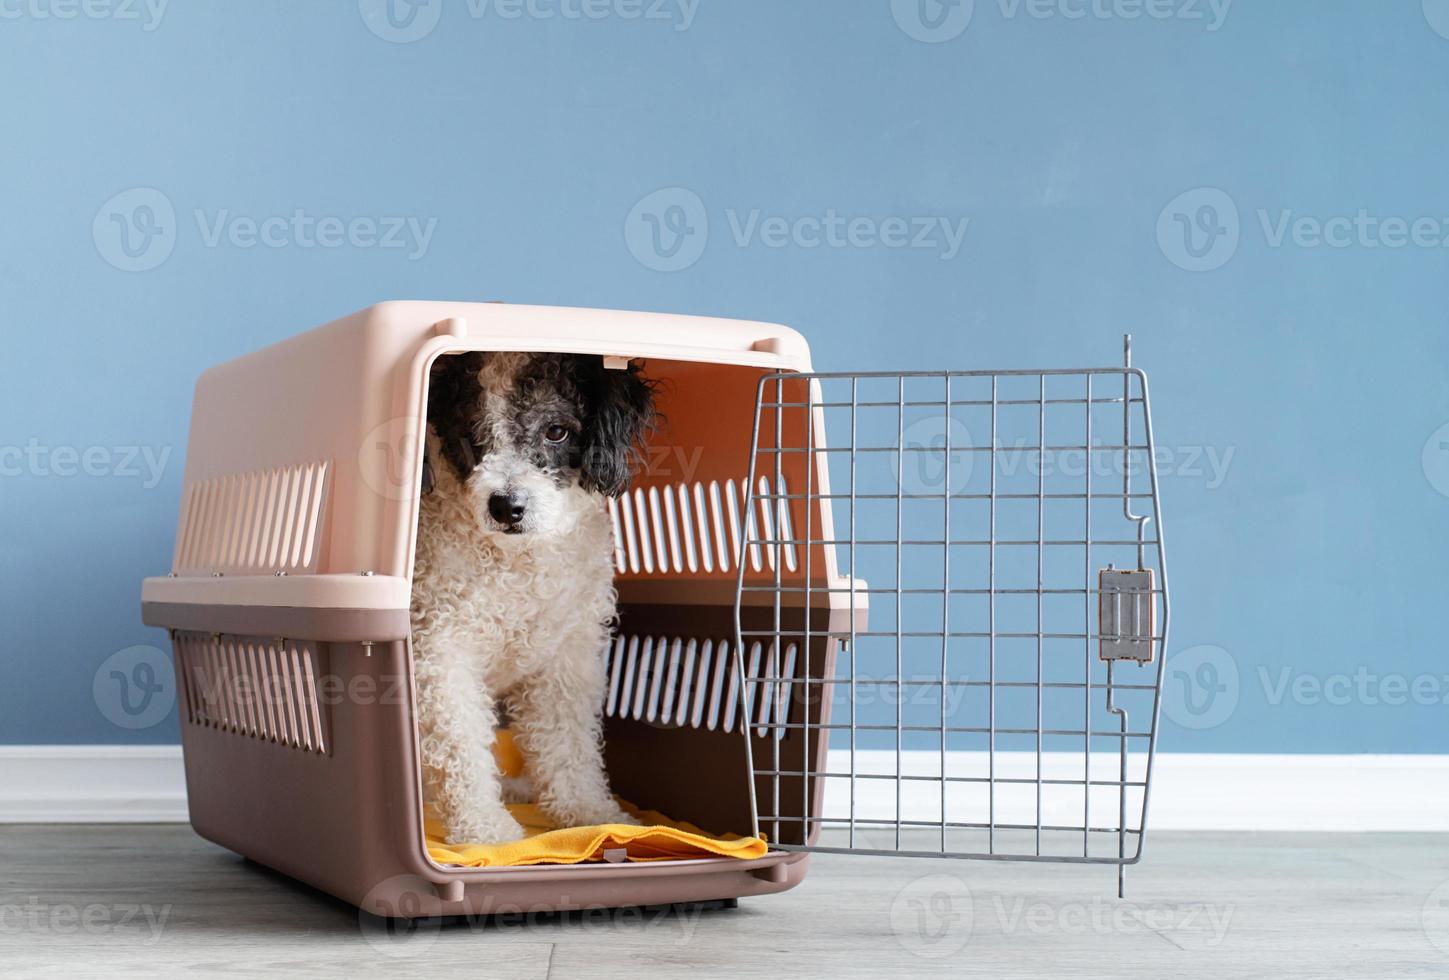 Cute bichon frise dog sitting in travel pet carrier, blue wall background photo